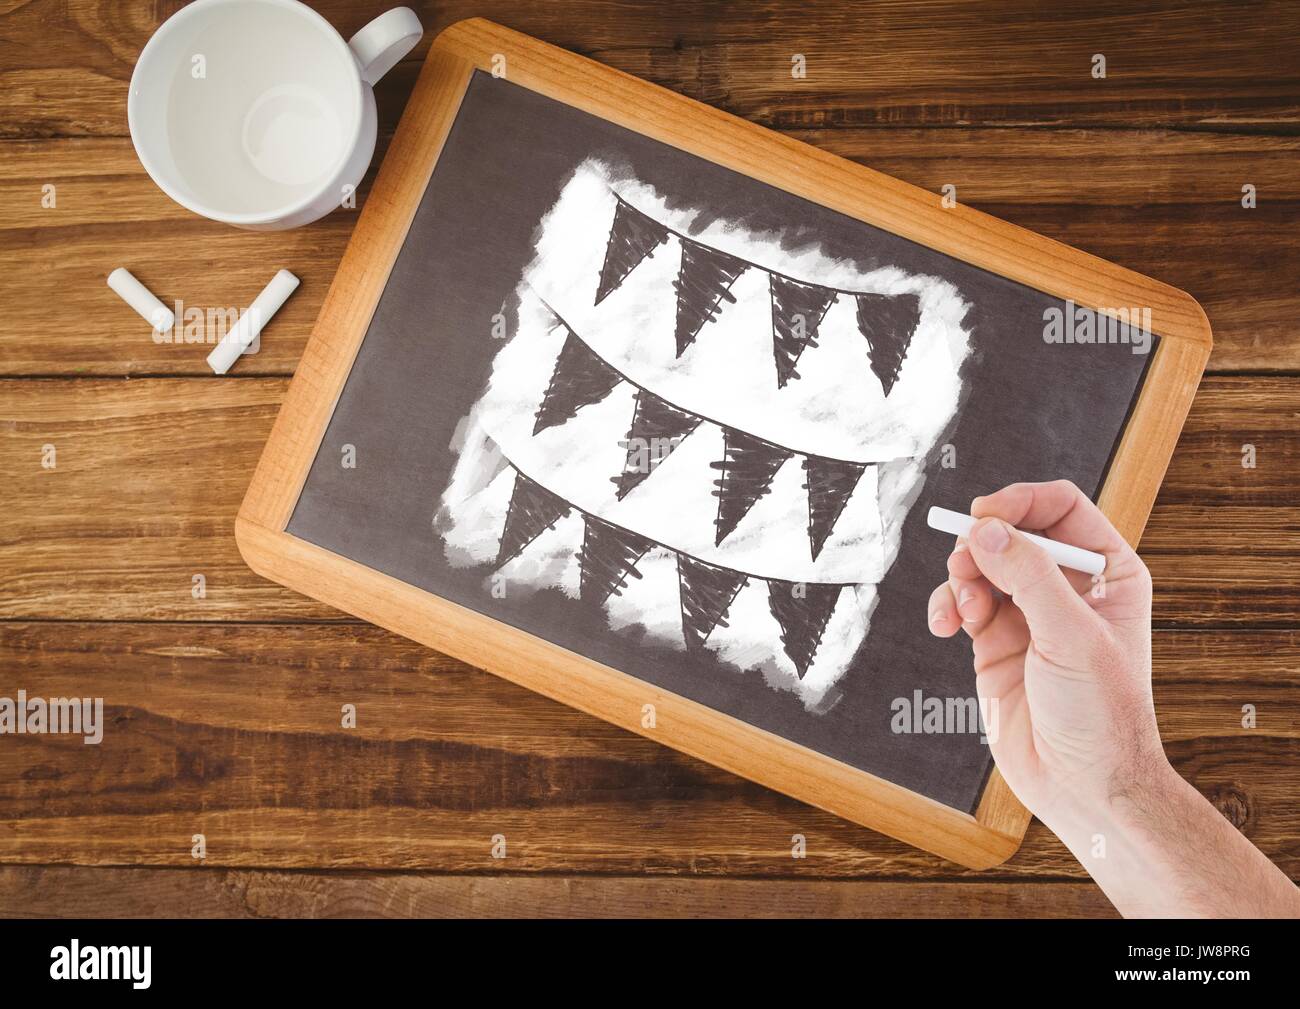 Digital composite of Hand drawing flags on blackboard with coffee Stock Photo